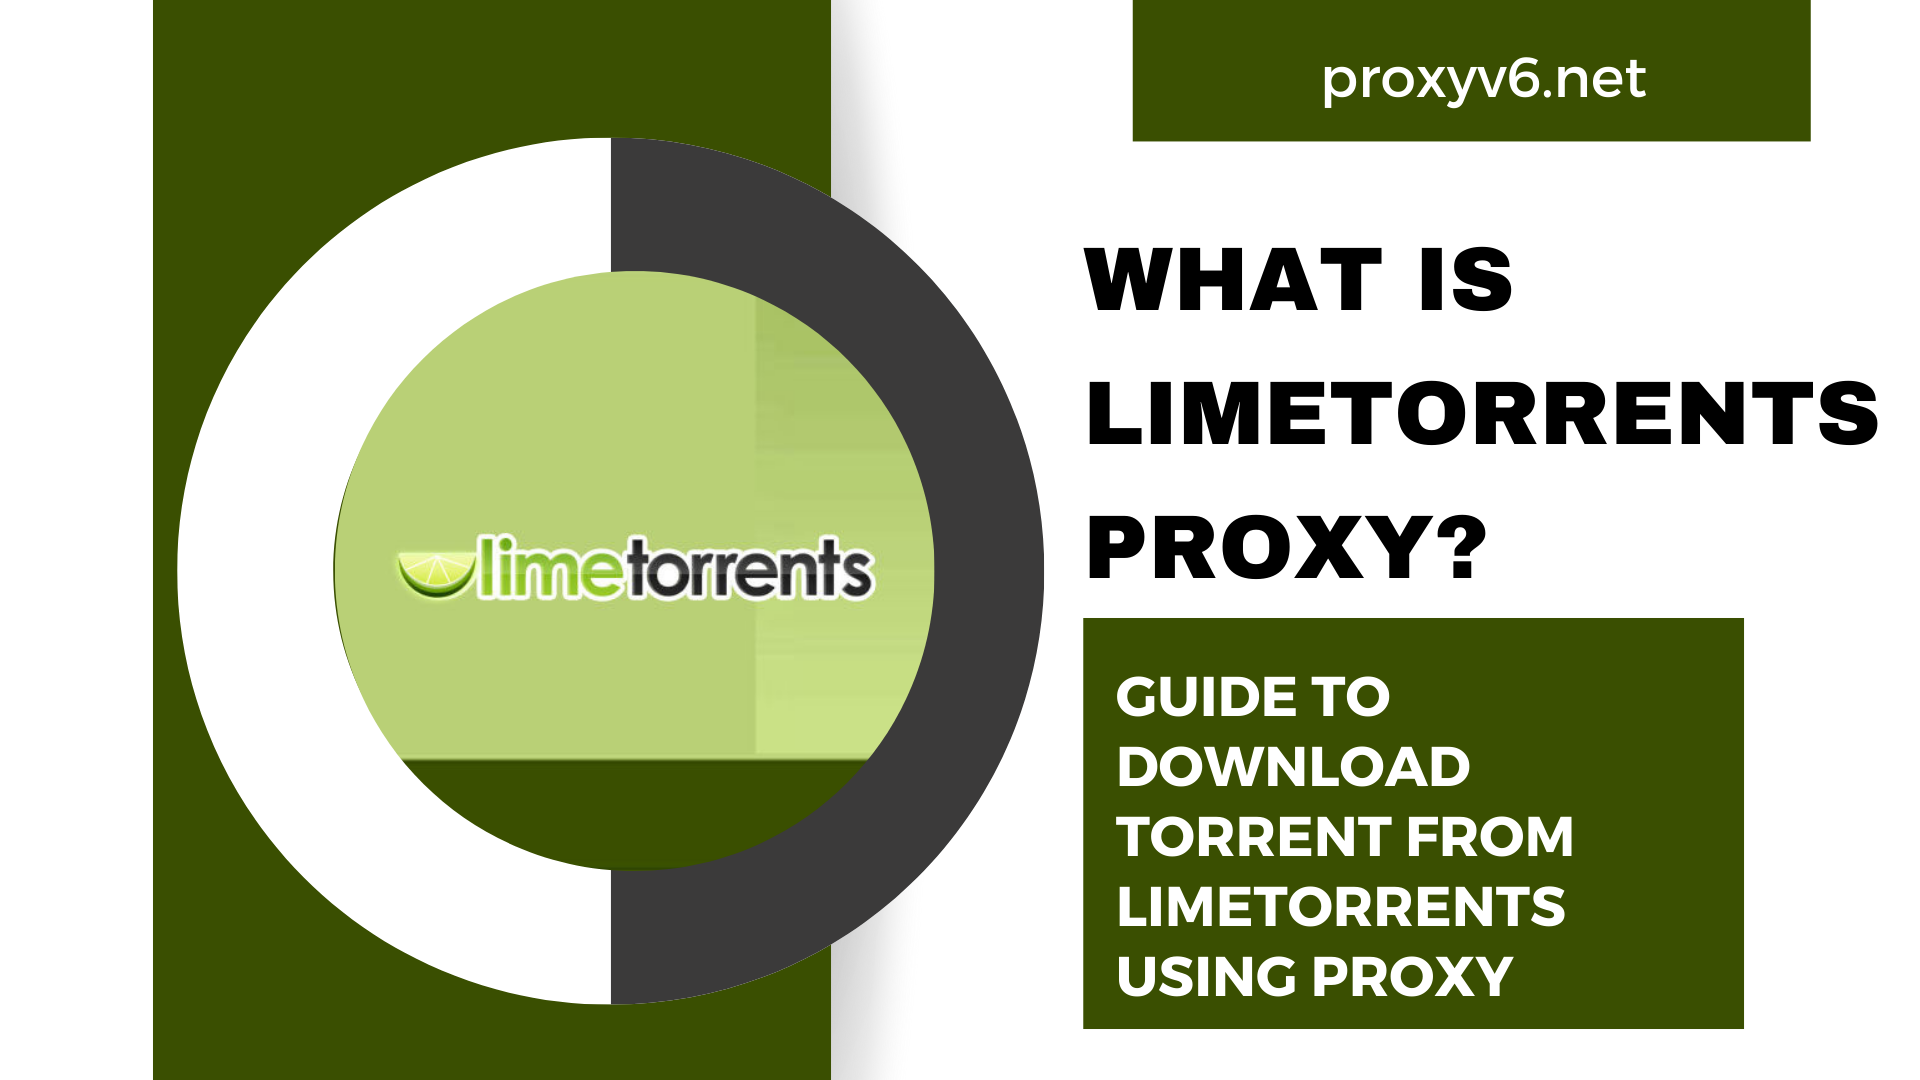 What is Limetorrents Proxy? Guide to download Torrent from Limetorrents using Proxy